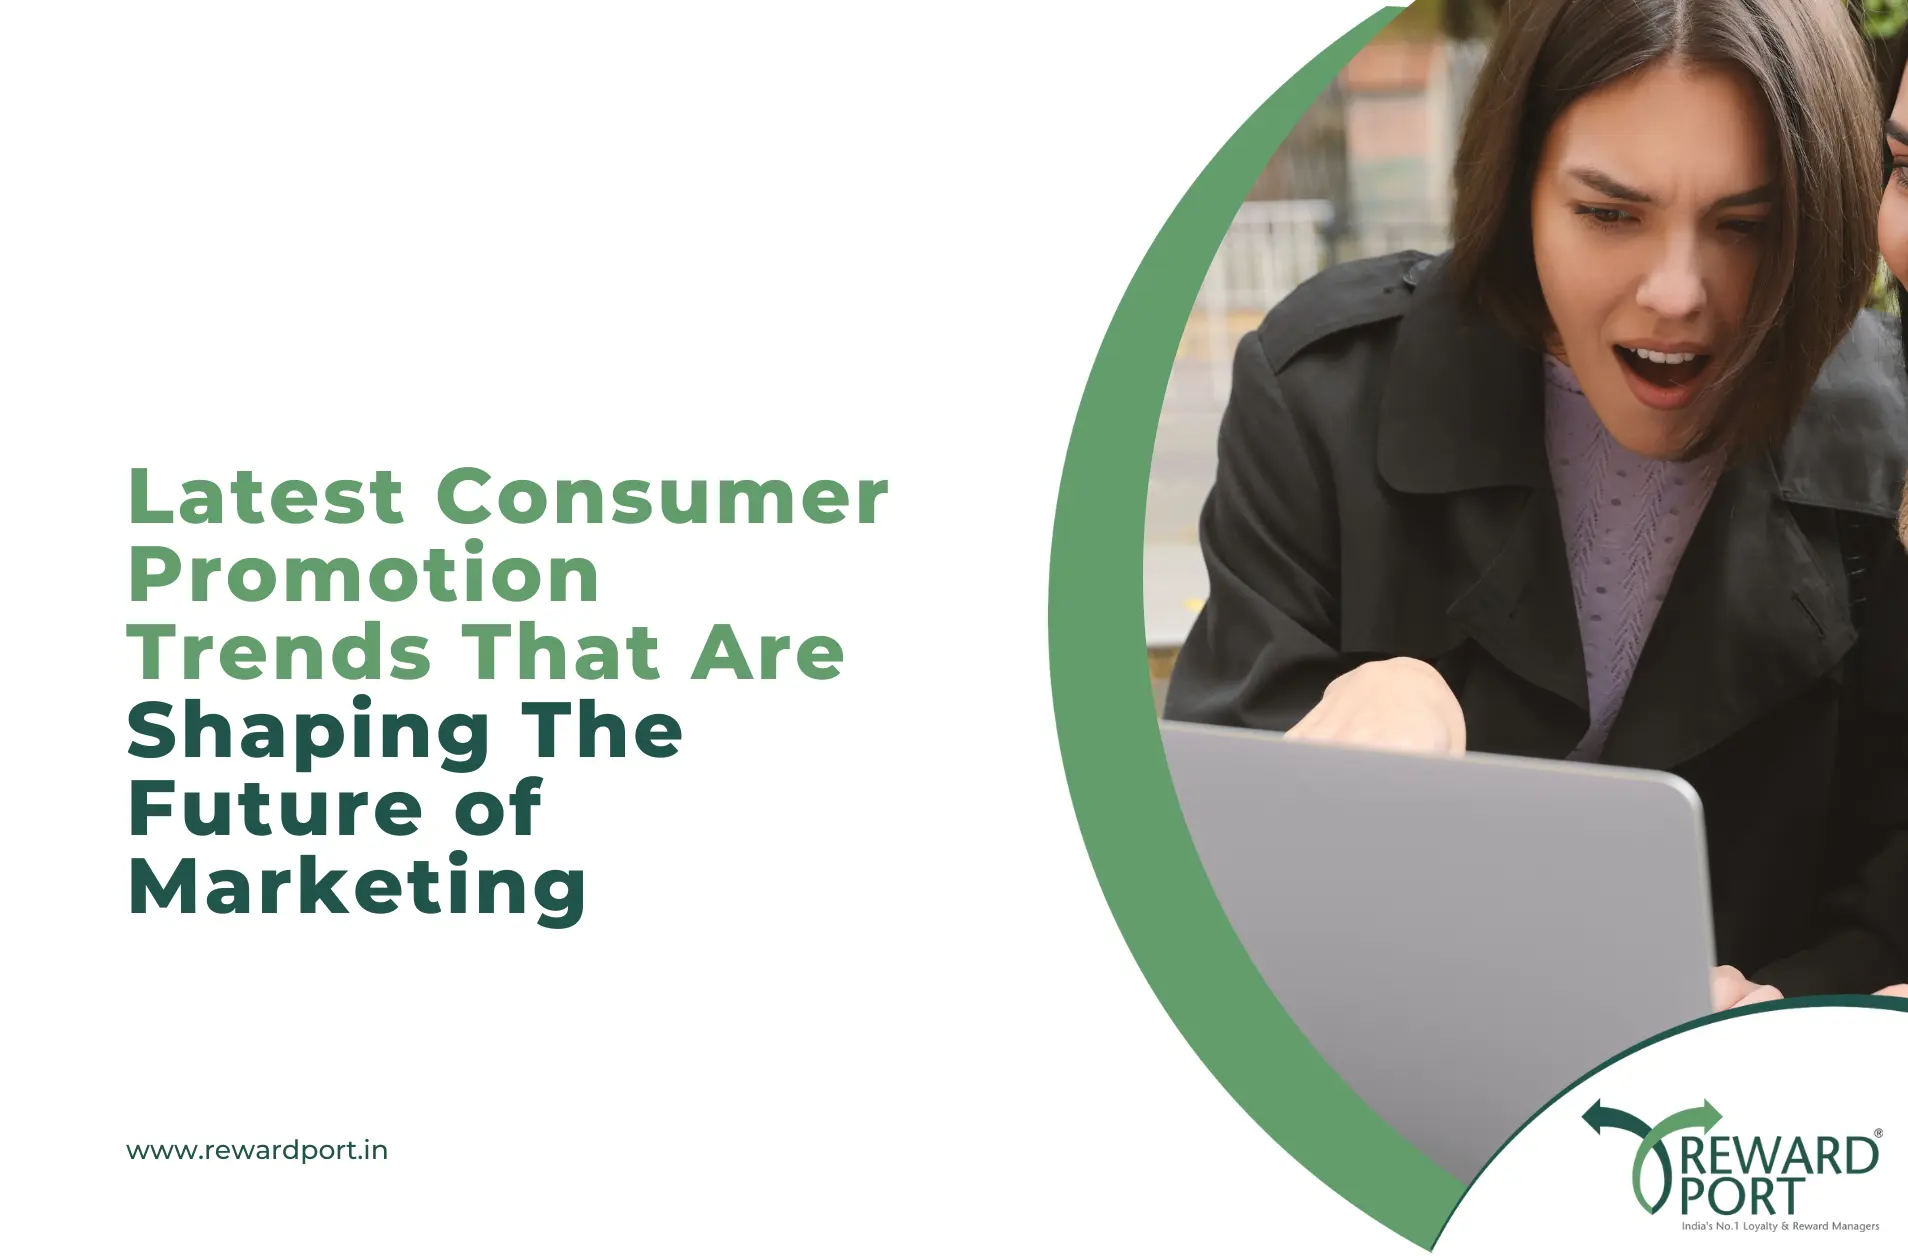 Latest Consumer Promotion Trends That Are Shaping The Future of Marketing